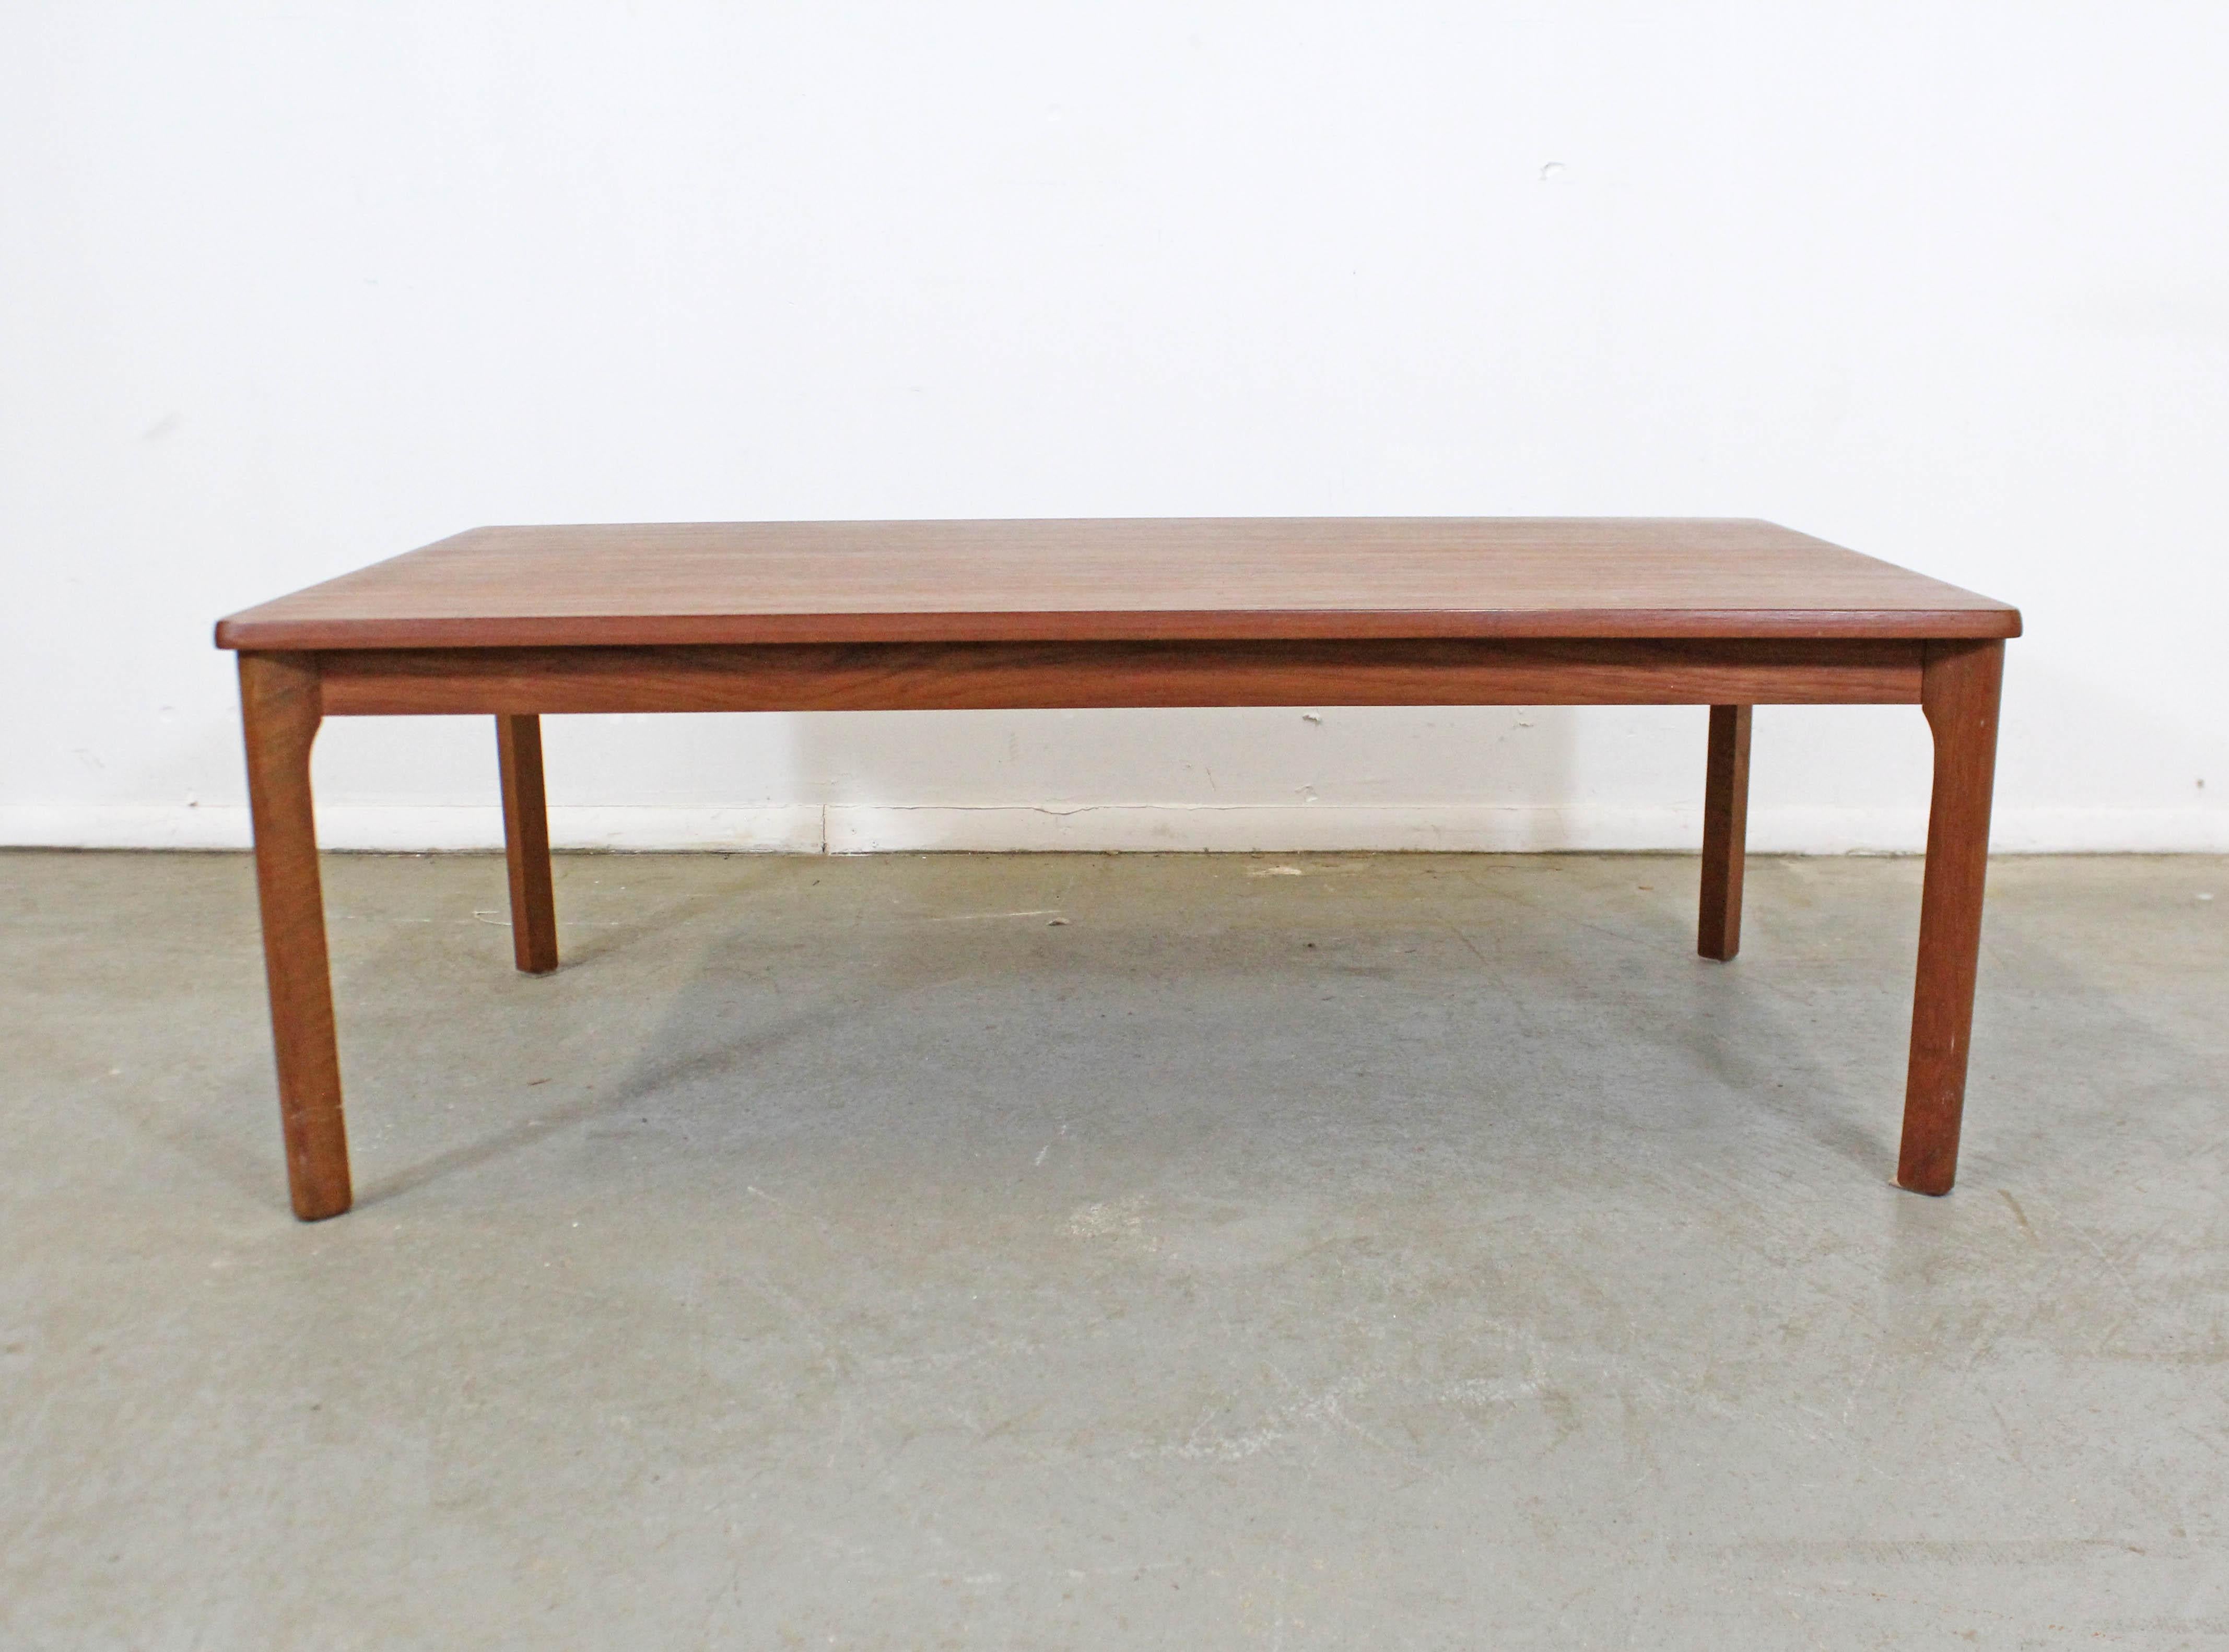 What a find. Offered is a Danish modern coffee table made by Domino Mobler. It is in good condition with some age wear including surface scratches and minor scuff marks. It is structurally sound. Please review pictures and condition carefully. It is